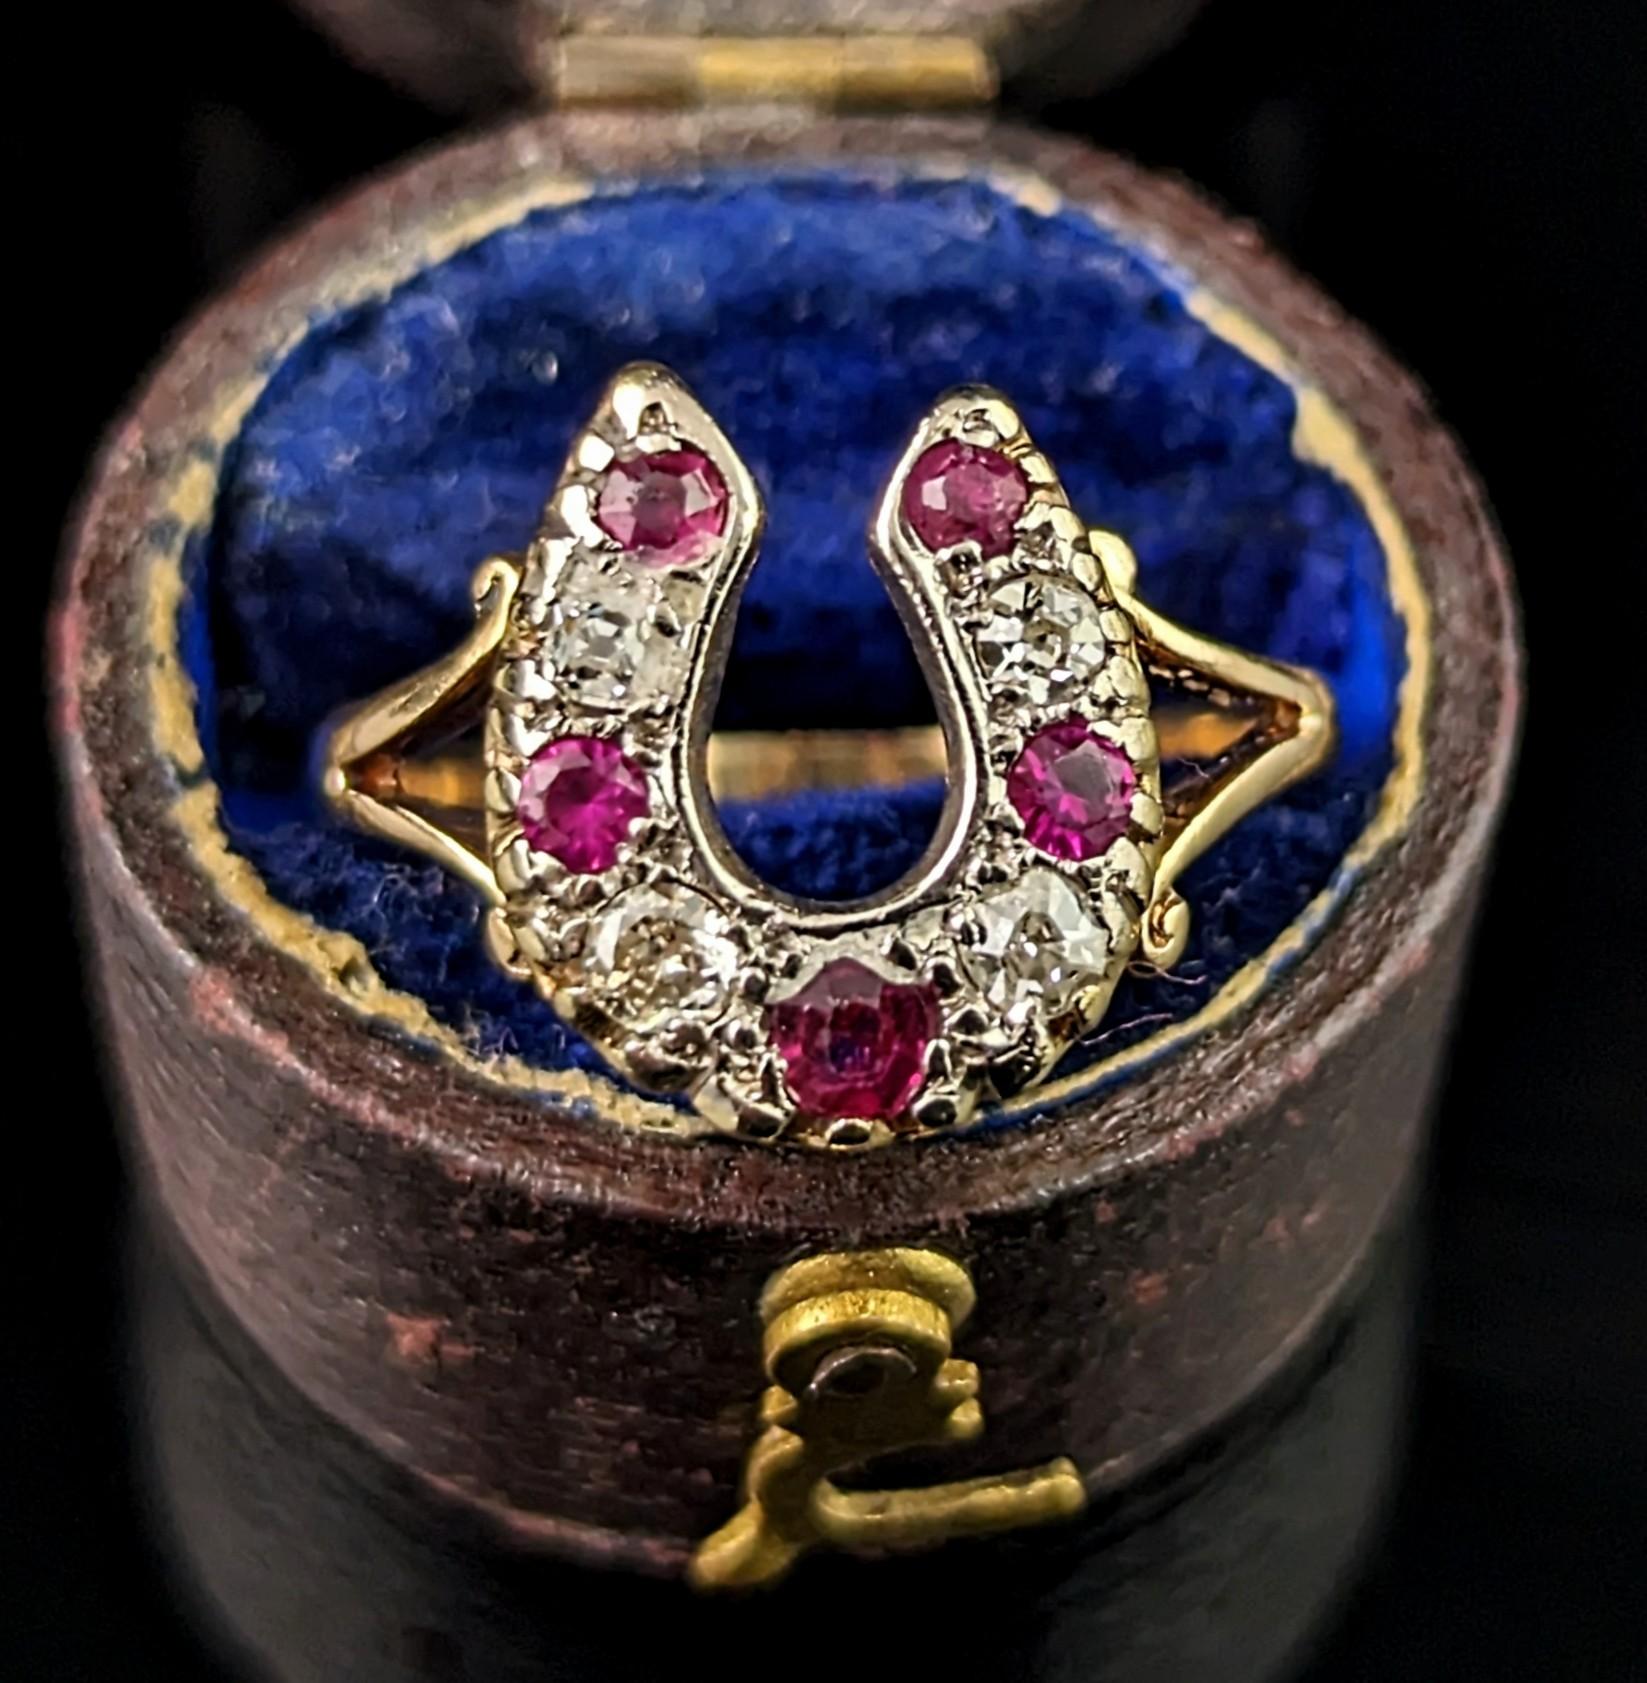 Nothing quite compares to the whimsical symbolism of the horseshoe and this antique Ruby and Diamond horseshoe ring is the perfect piece to add a dash of good luck to your jewelry collection.

Crafted in rich, buttery 18ct gold it has slender